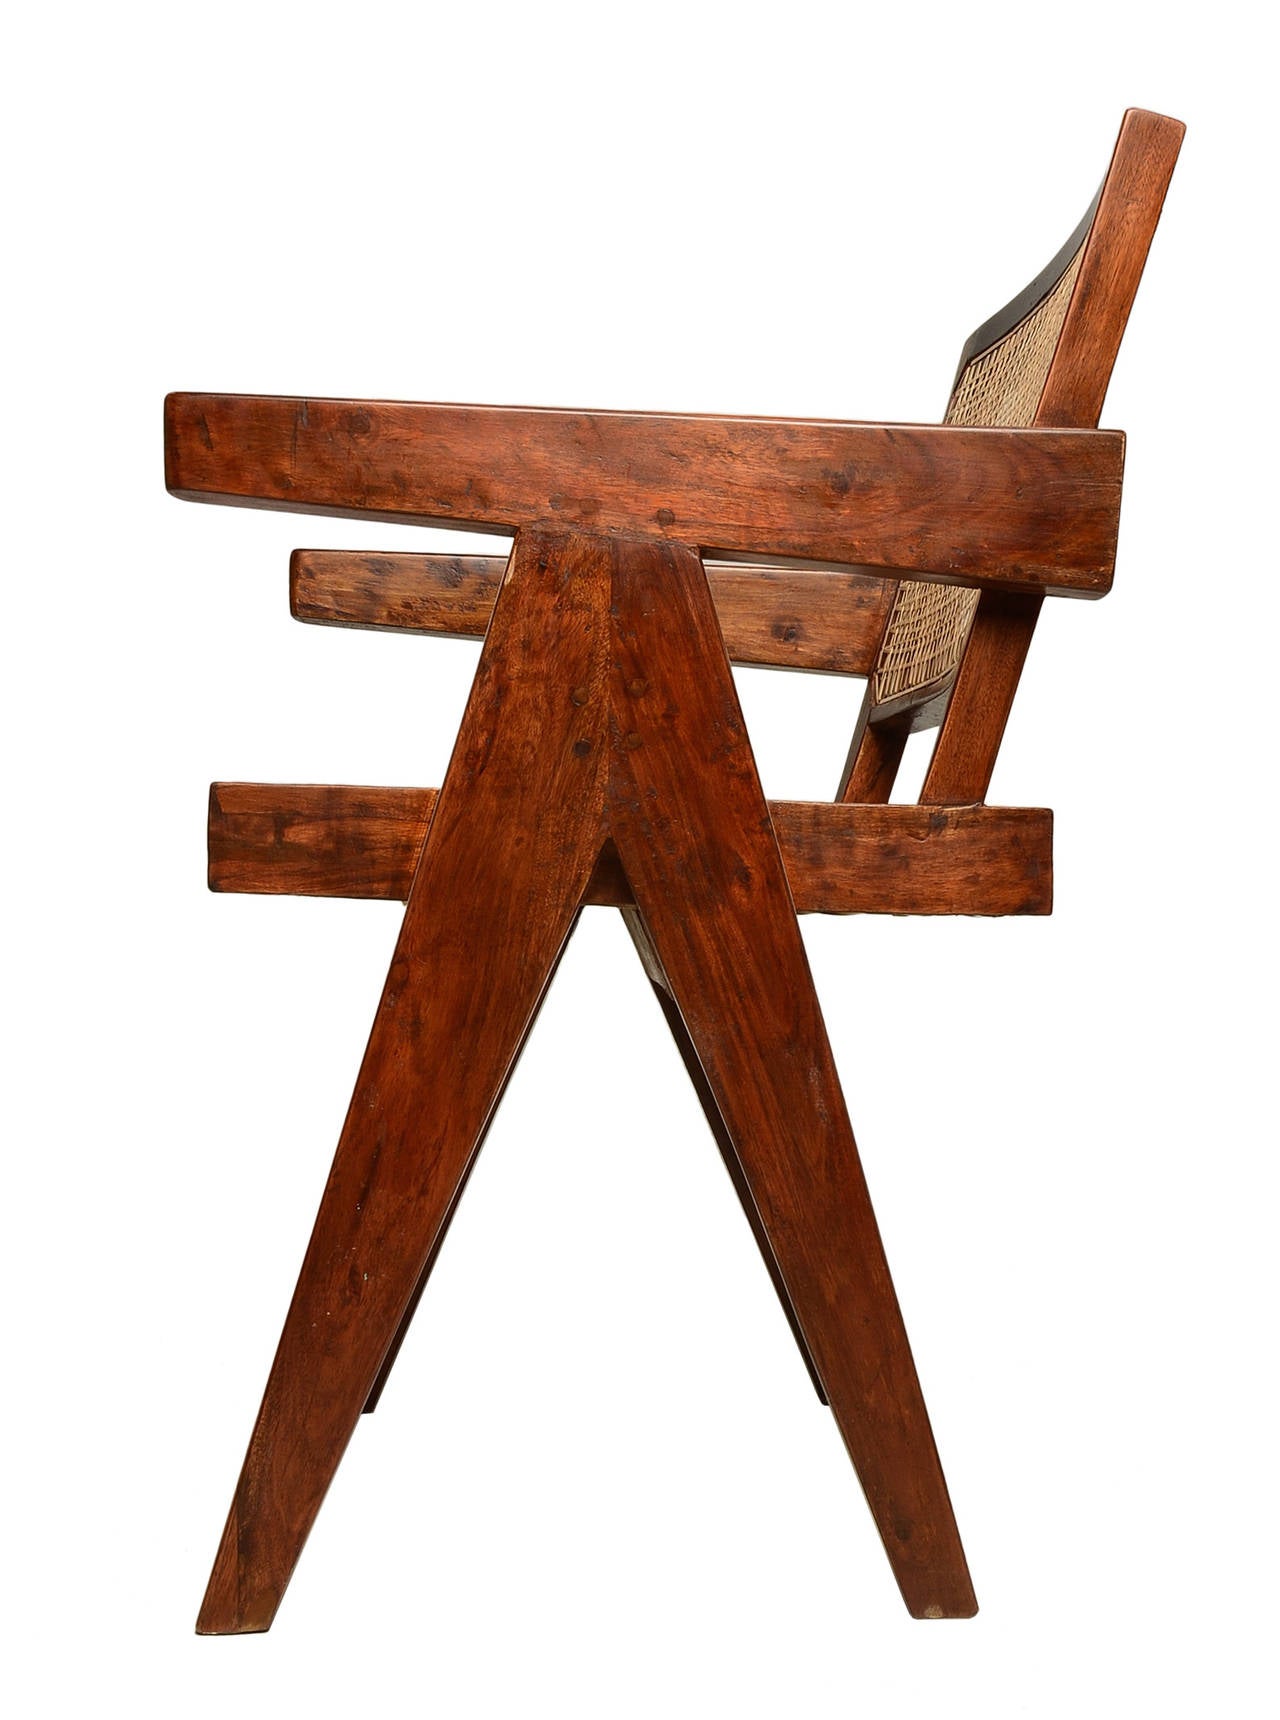 Indian Desk and Chair for Chandigarh by Pierre Jeanneret